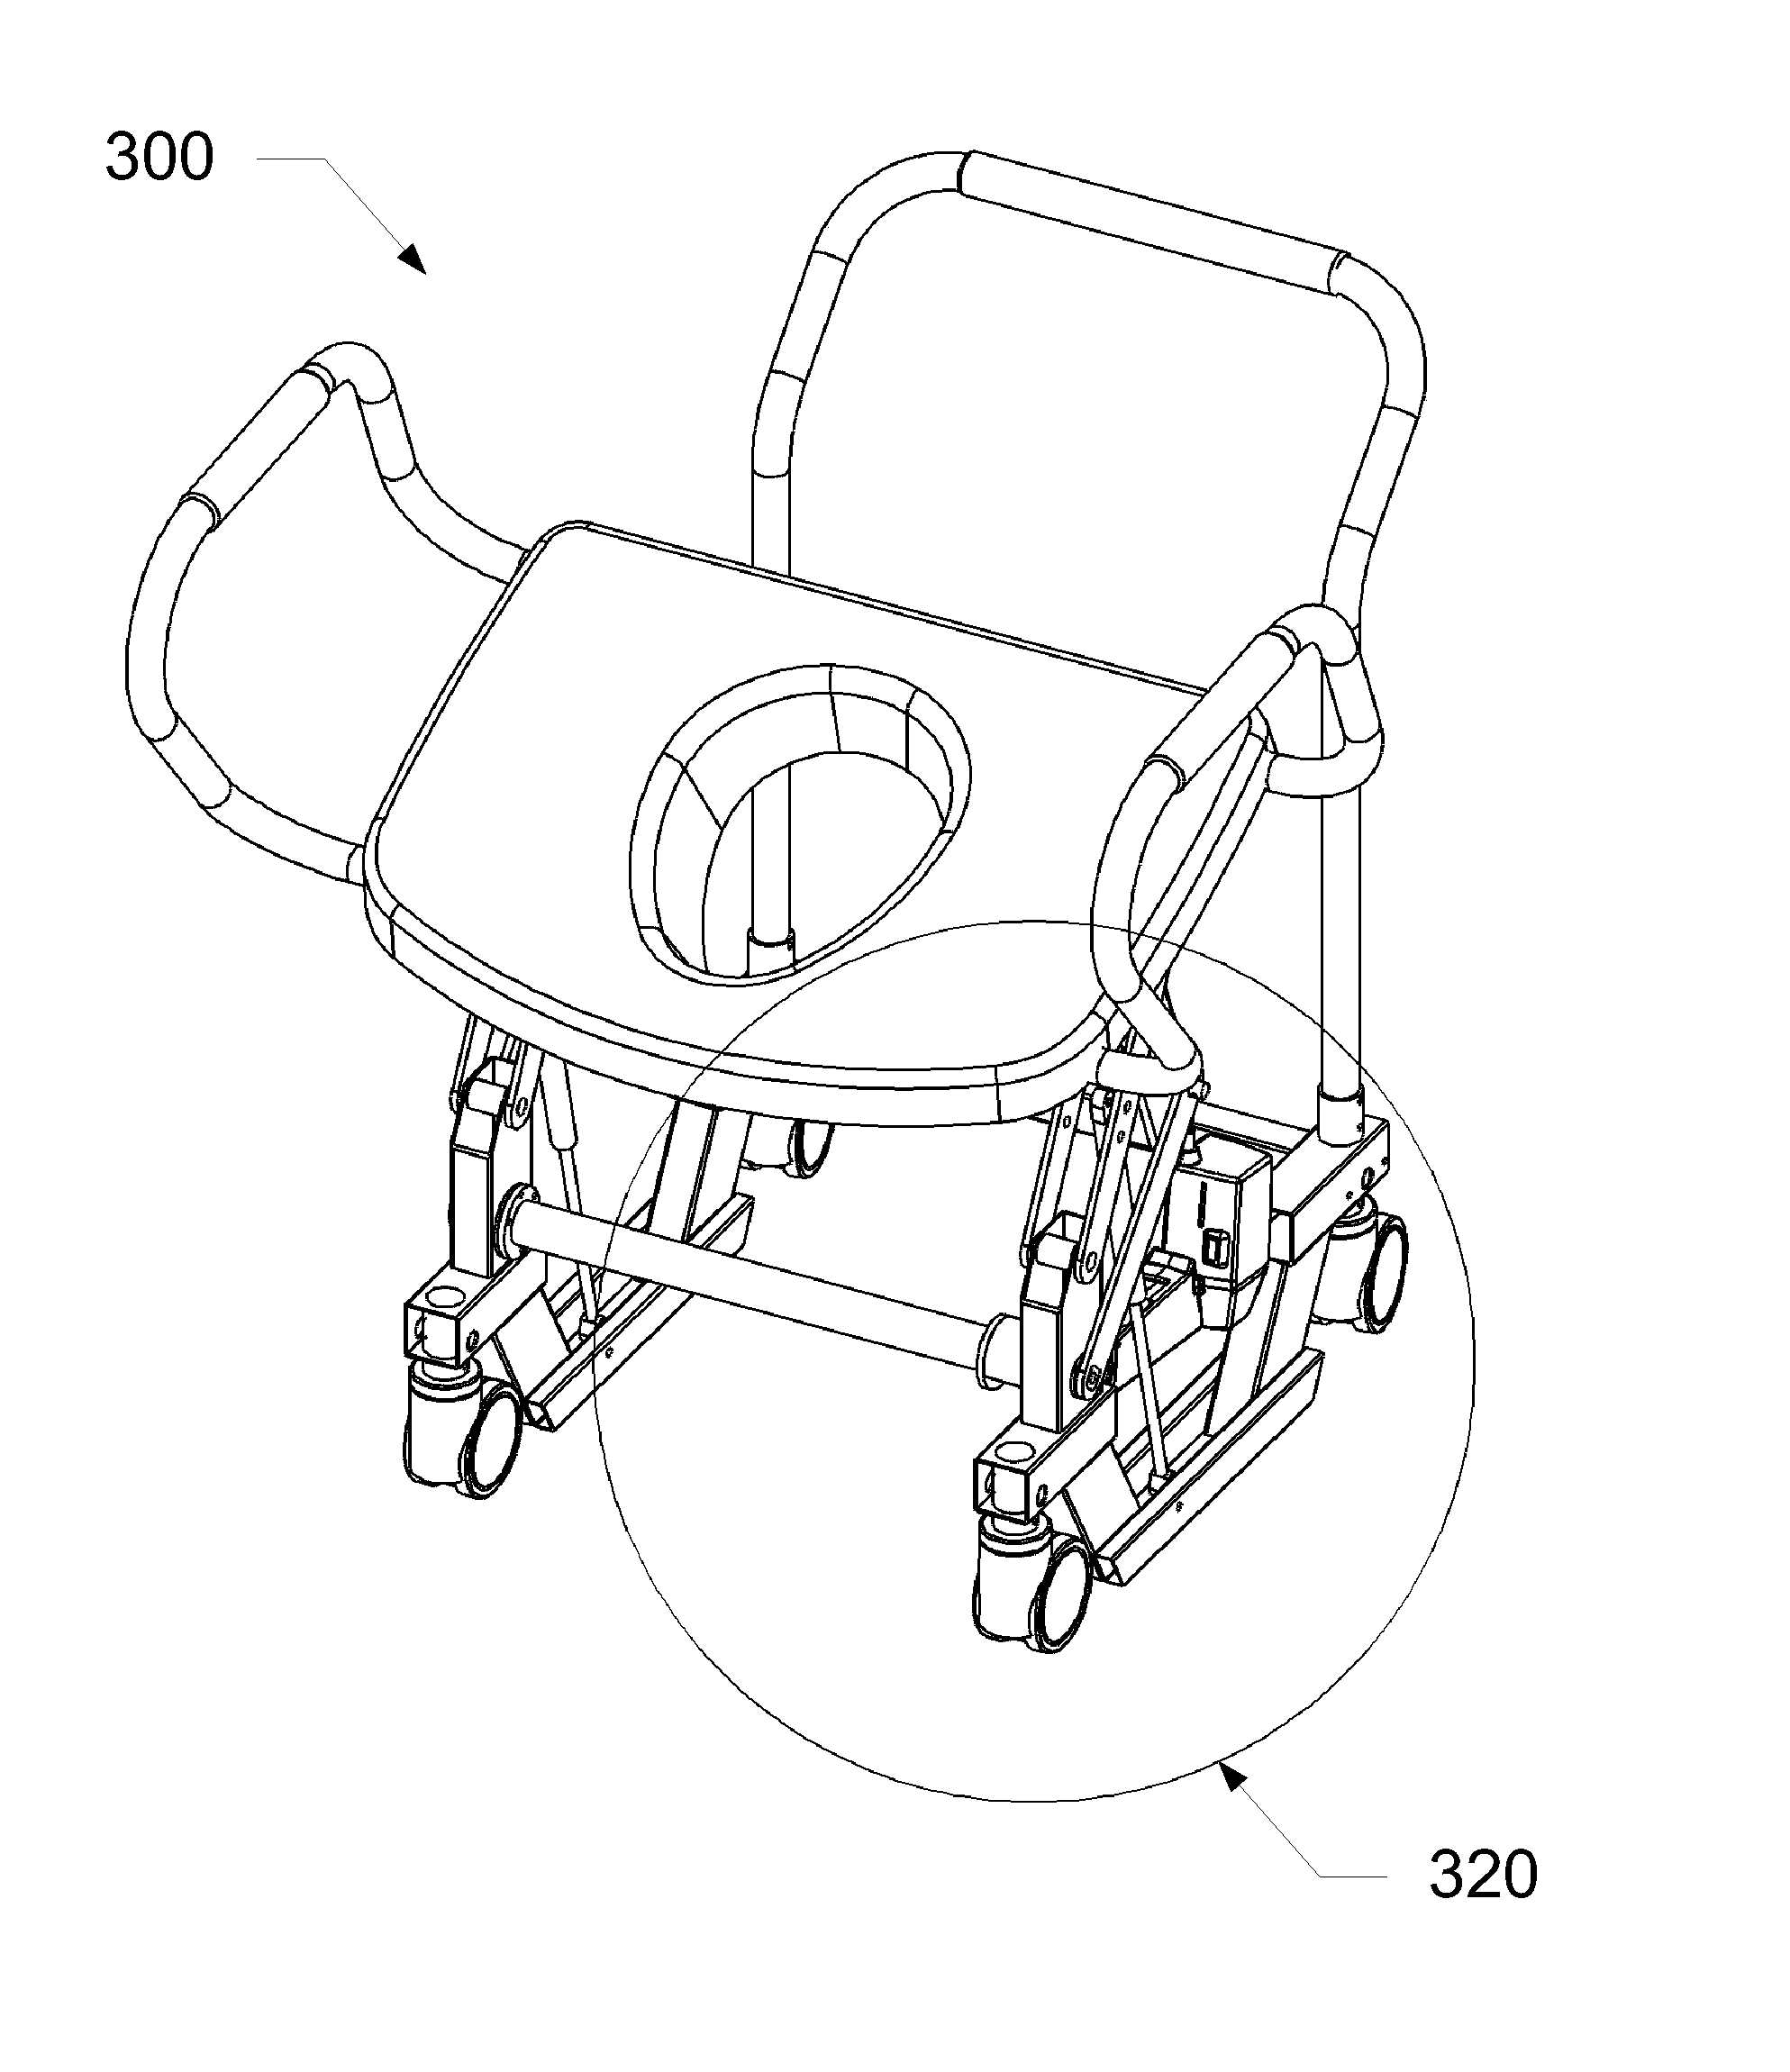 Devices and Methods for Lift Assistance